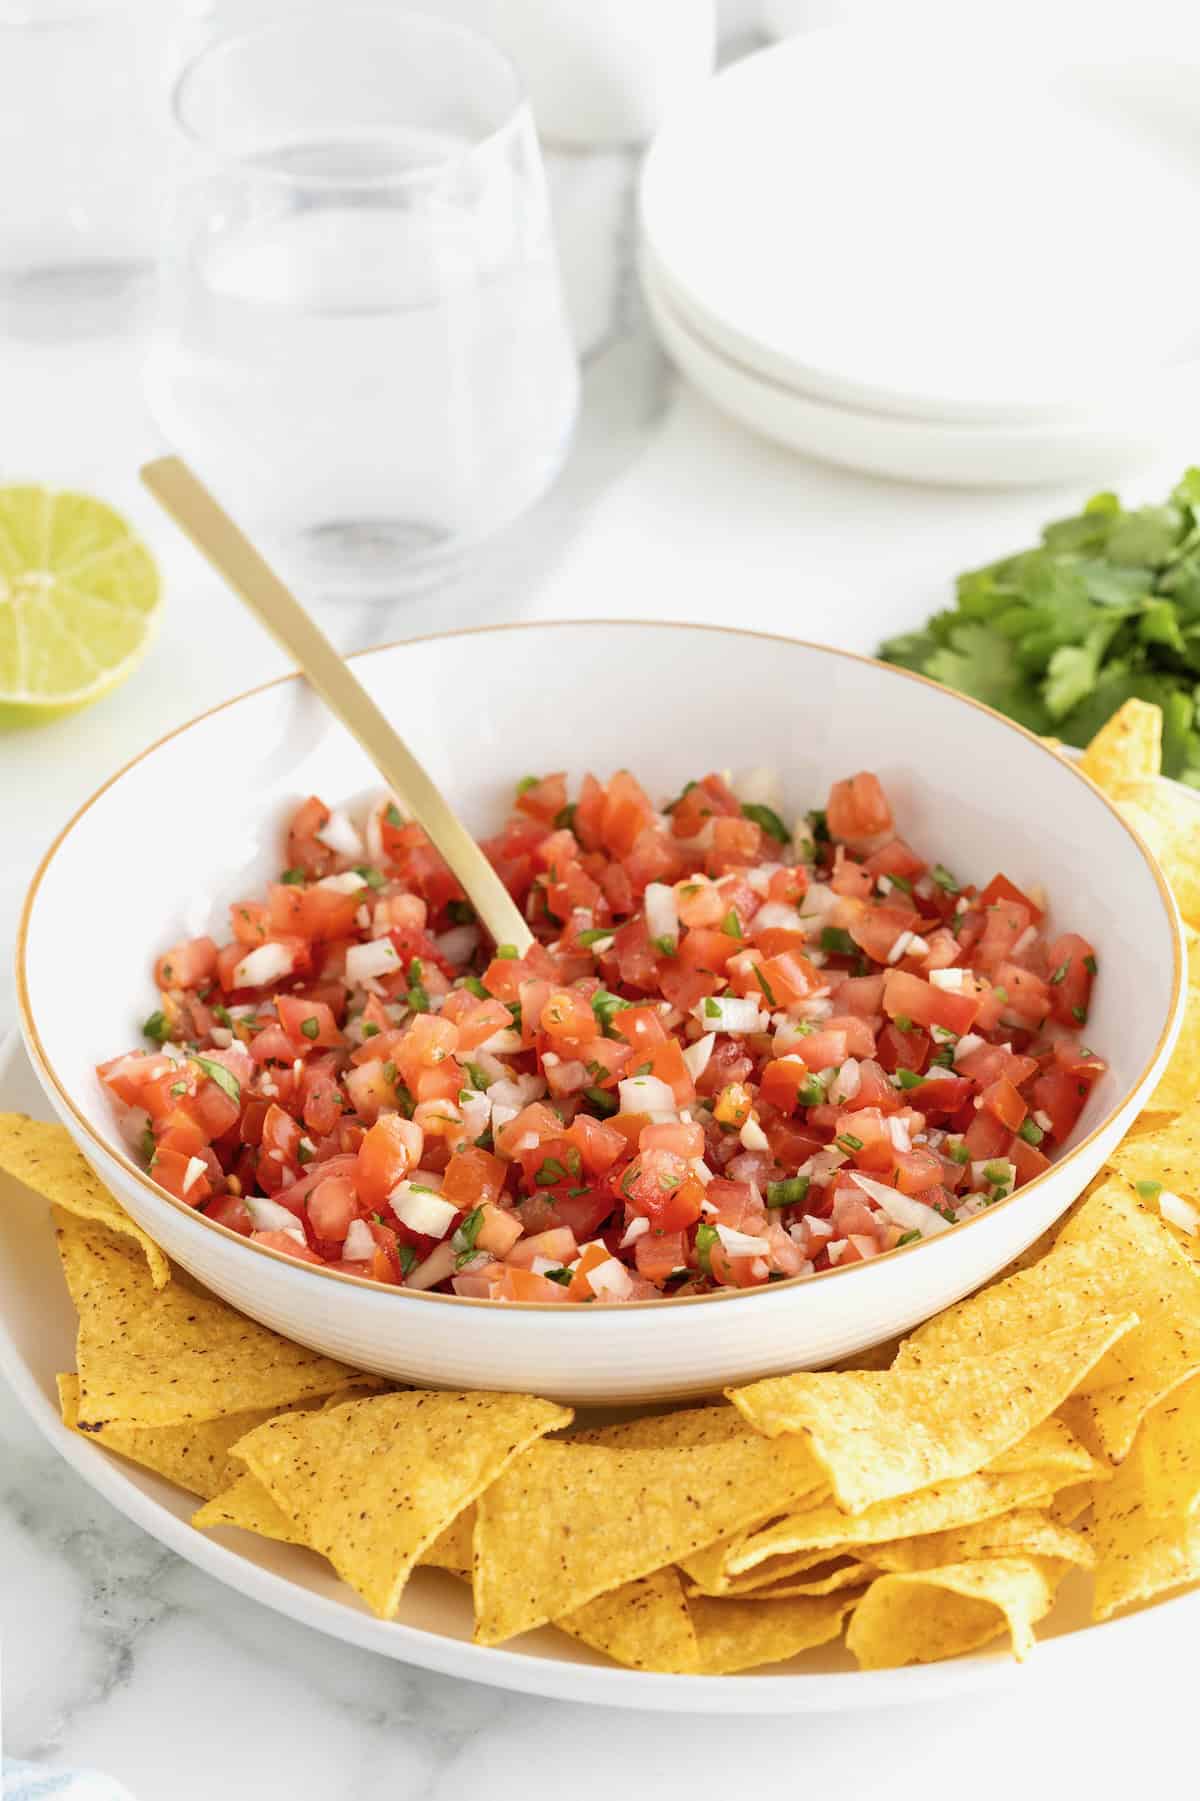 A large white serving bowl of pico de Gallo garnished with a sprig of cilantro. There are tortilla chips surrounding the serving bowl.